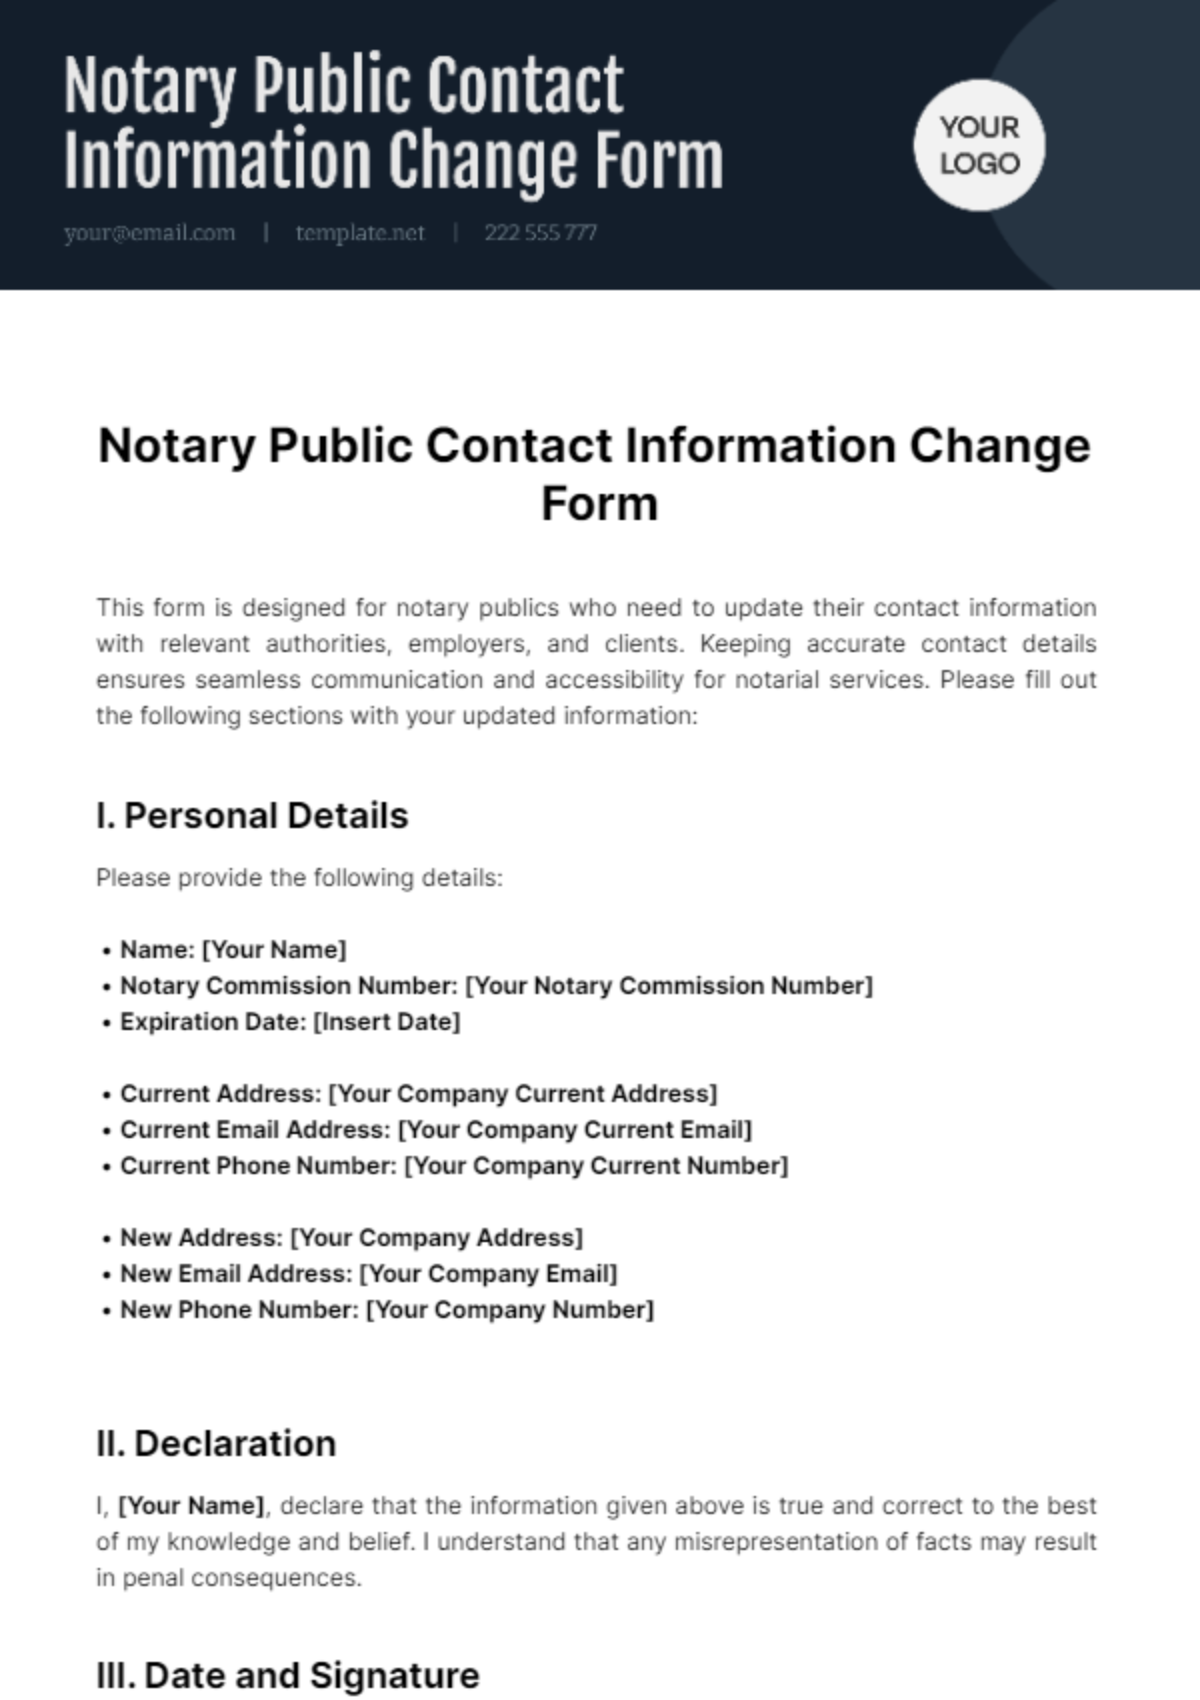 Notary Public Contact Information Change Form Template